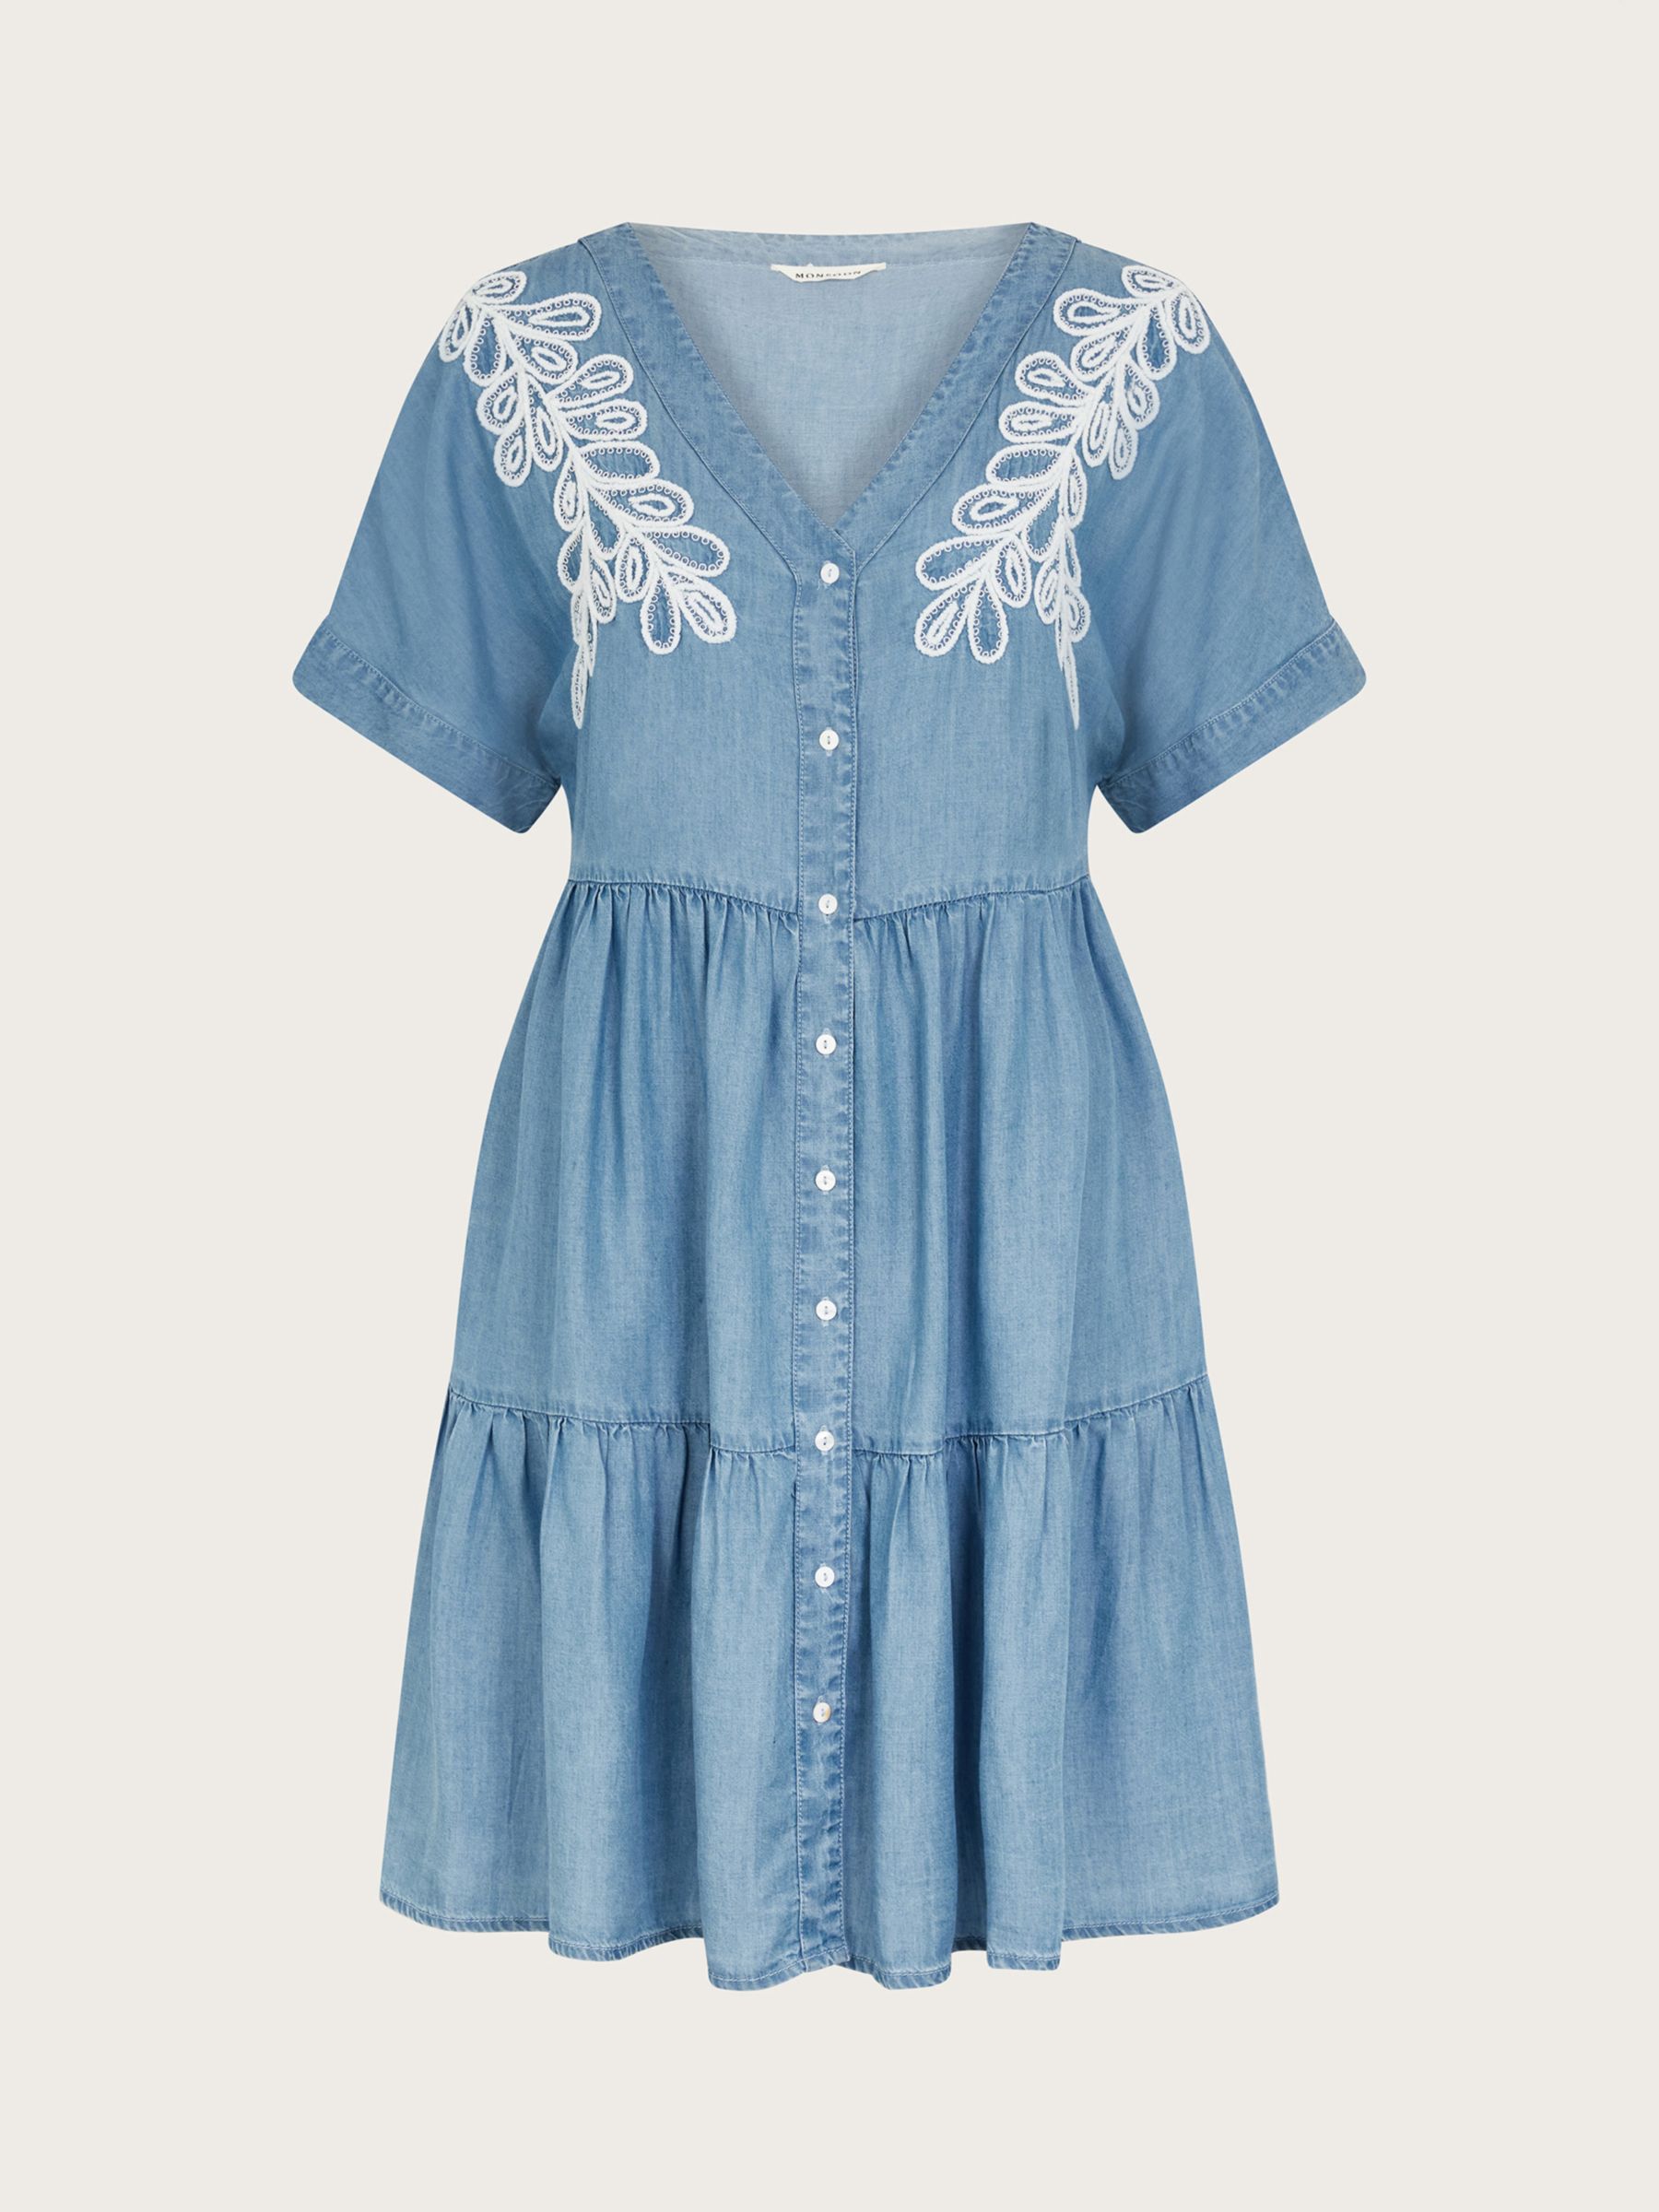 Monsoon Lacy Embroidery Detail Tiered Dress, Denim Blue, S